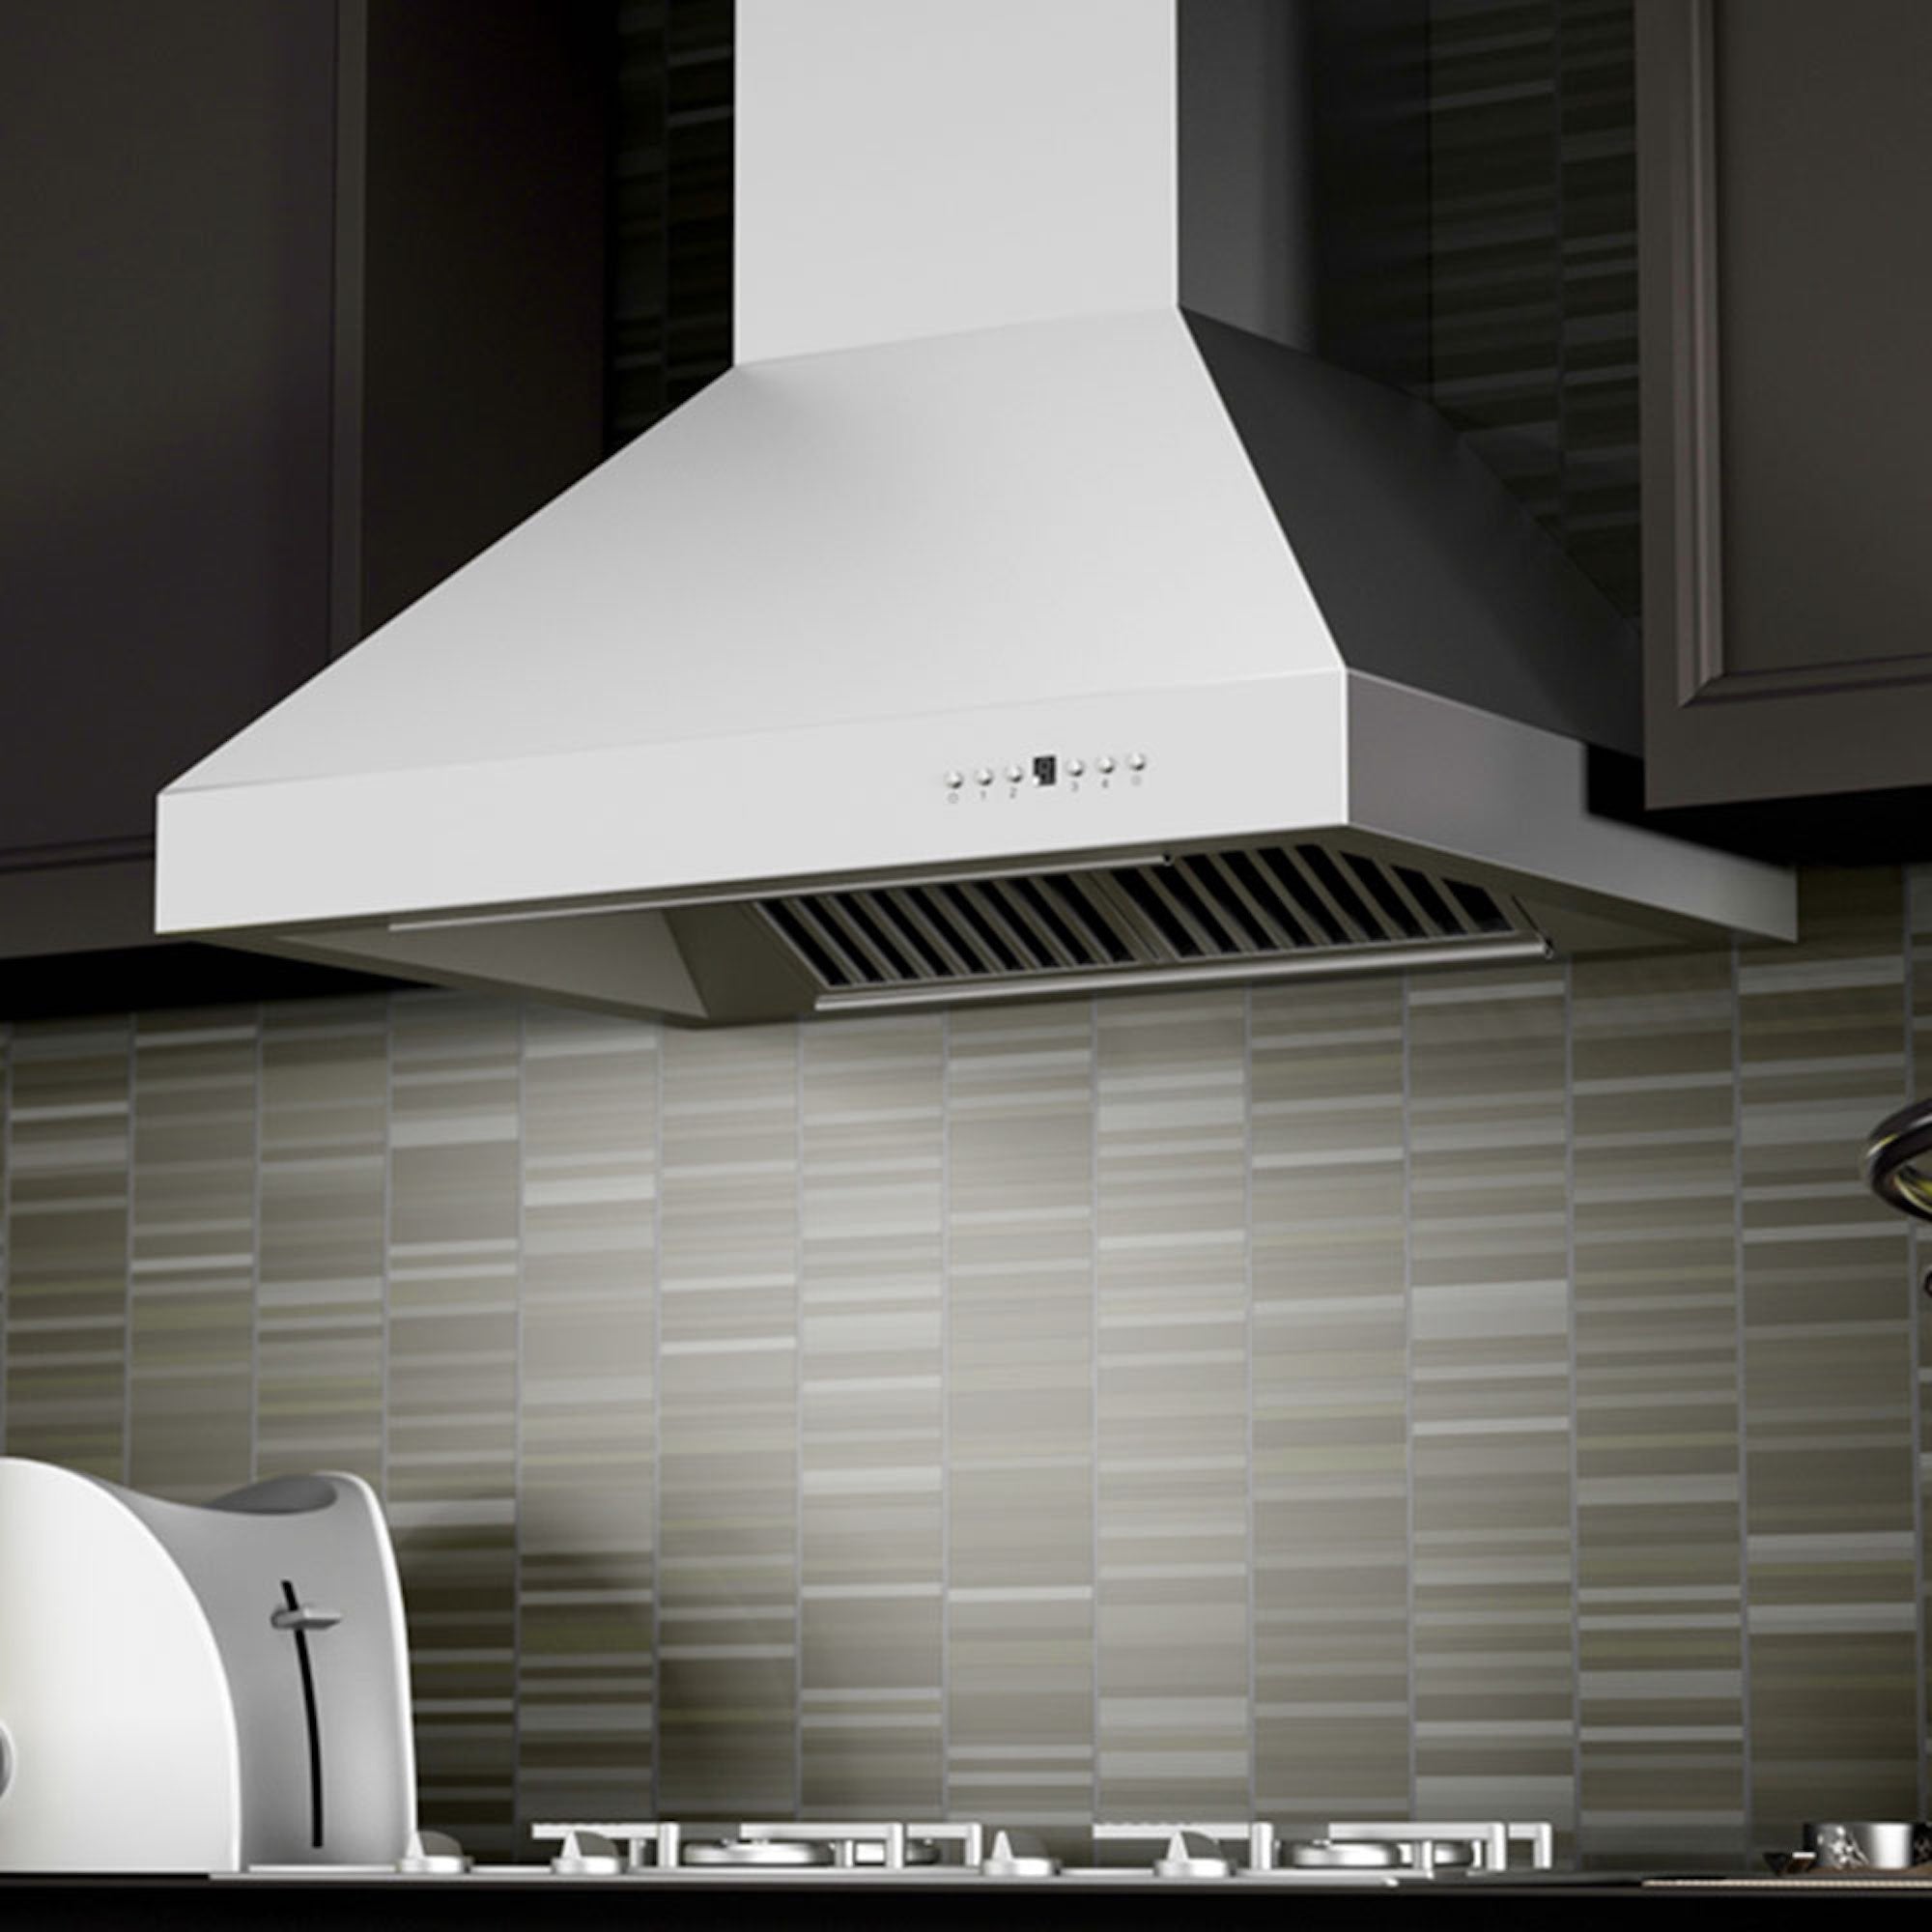 ZLINE Ducted Wall Mount Range Hood in Outdoor Approved Stainless Steel (697-304) rendering in a rustic kitchen from below.